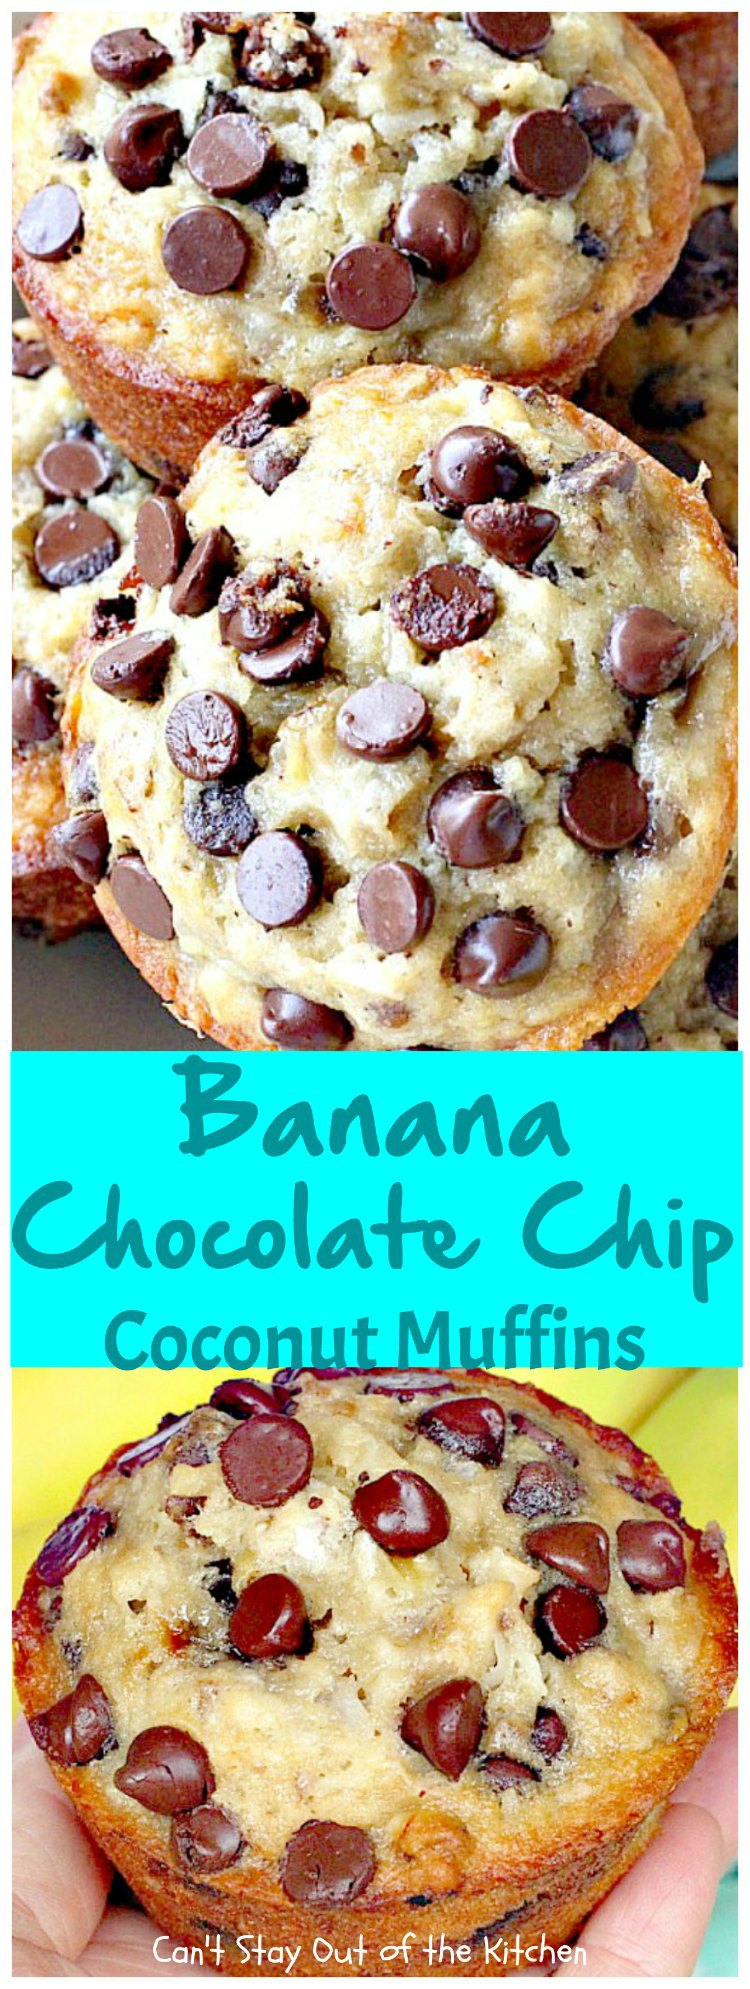 Banana Chocolate Chip Coconut Muffins | Can't Stay Out of the KitchenBanana Chocolate Chip Coconut Muffins | Can't Stay Out of the Kitchen